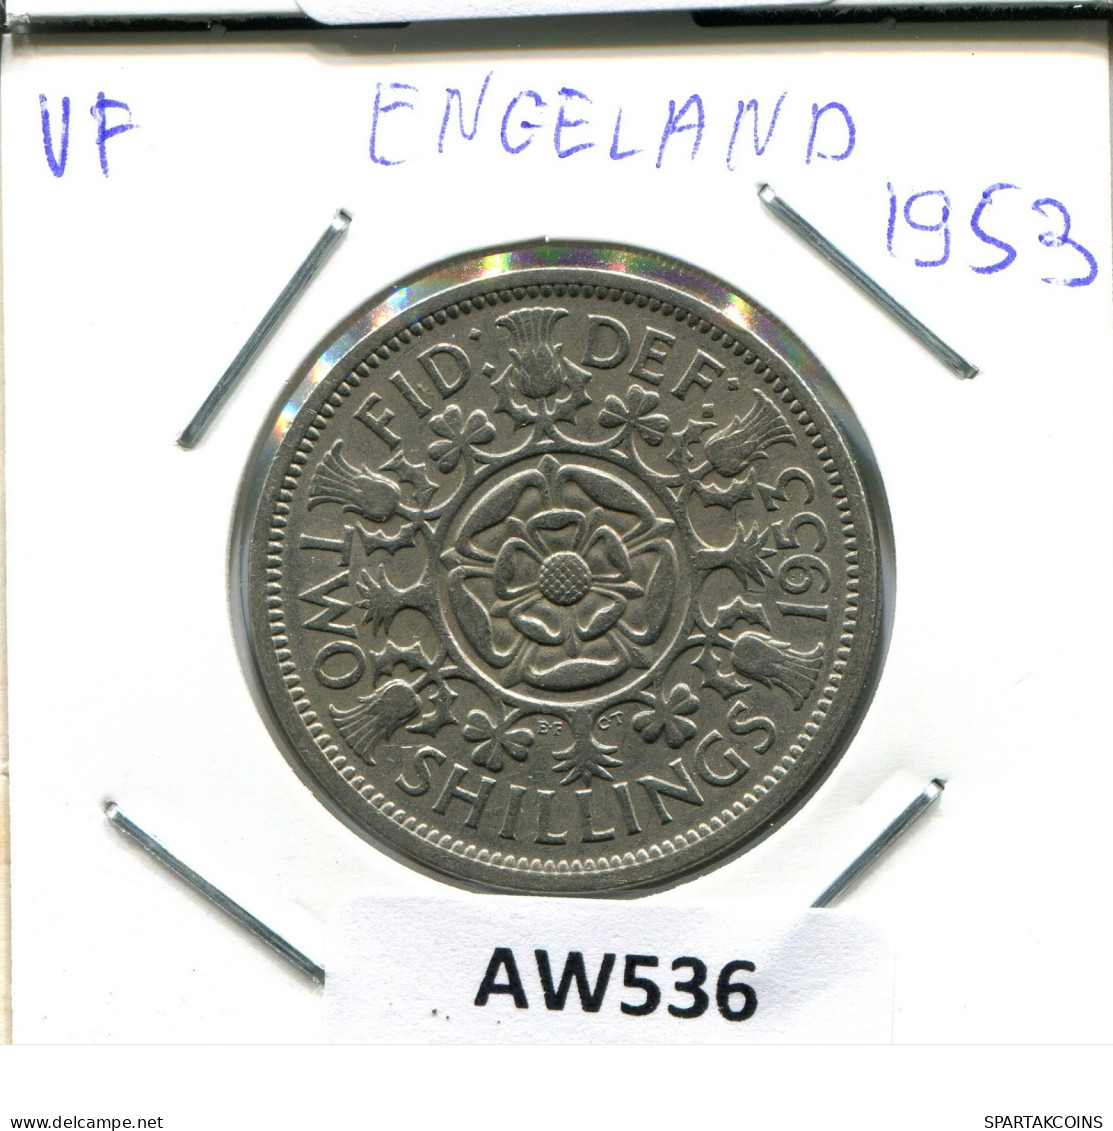 2 SHILLINGS 1953 UK GREAT BRITAIN Coin #AW536.U.A - J. 1 Florin / 2 Schillings